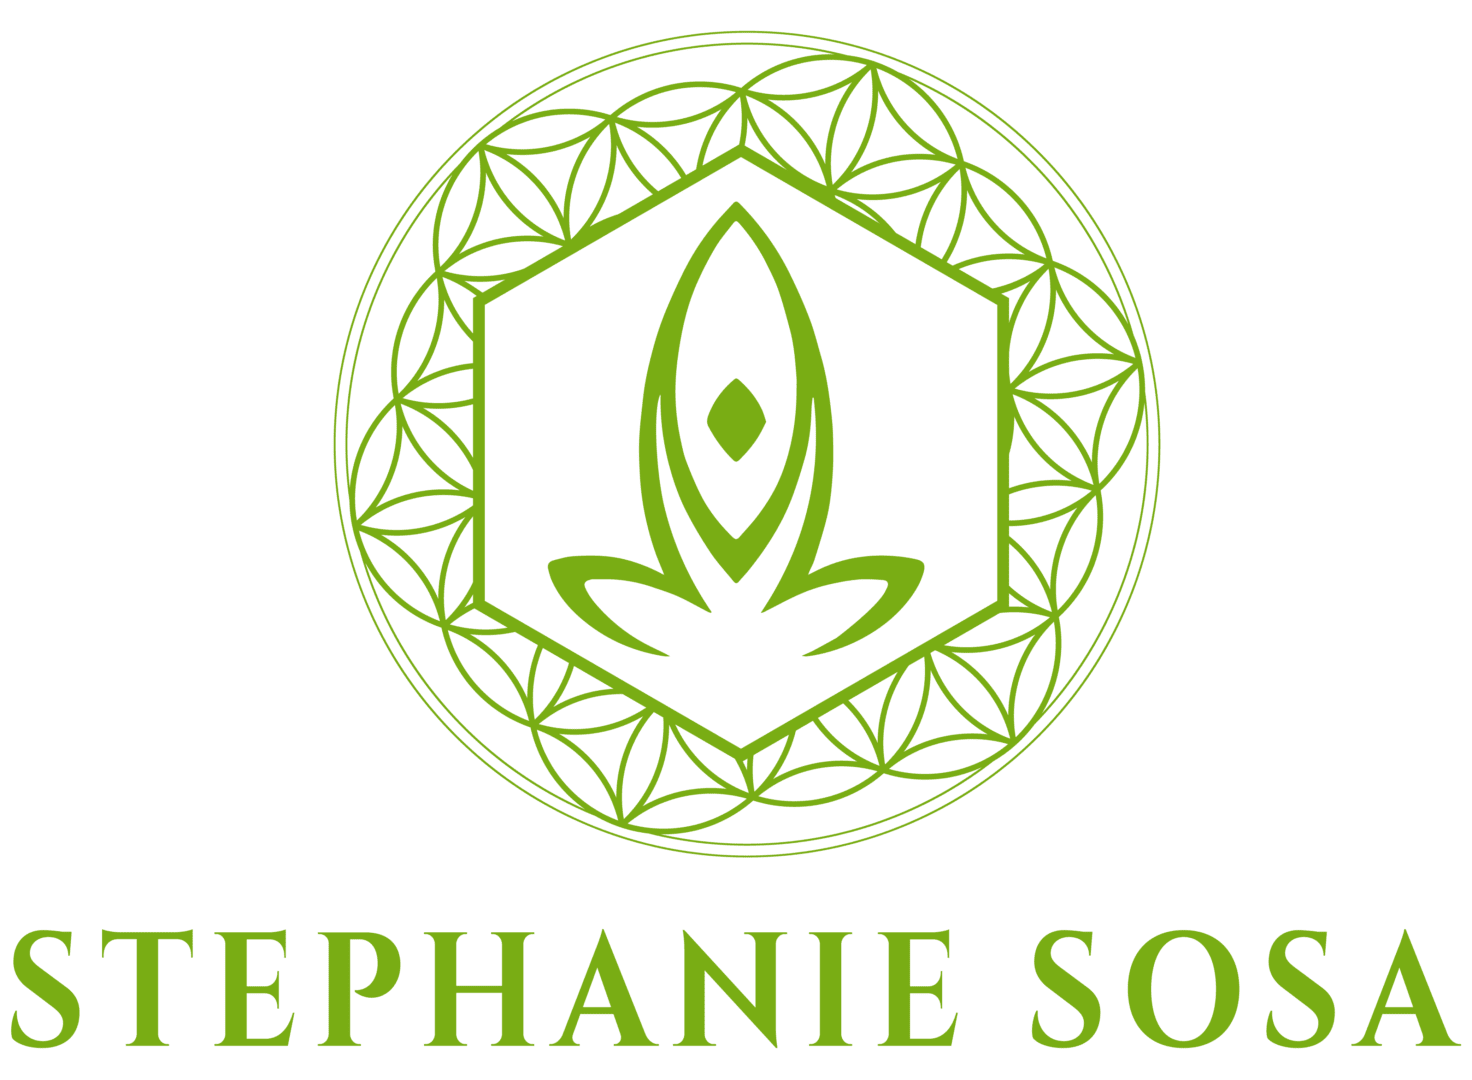 A green logo of an ethnic symbol with the name stephanie soso.